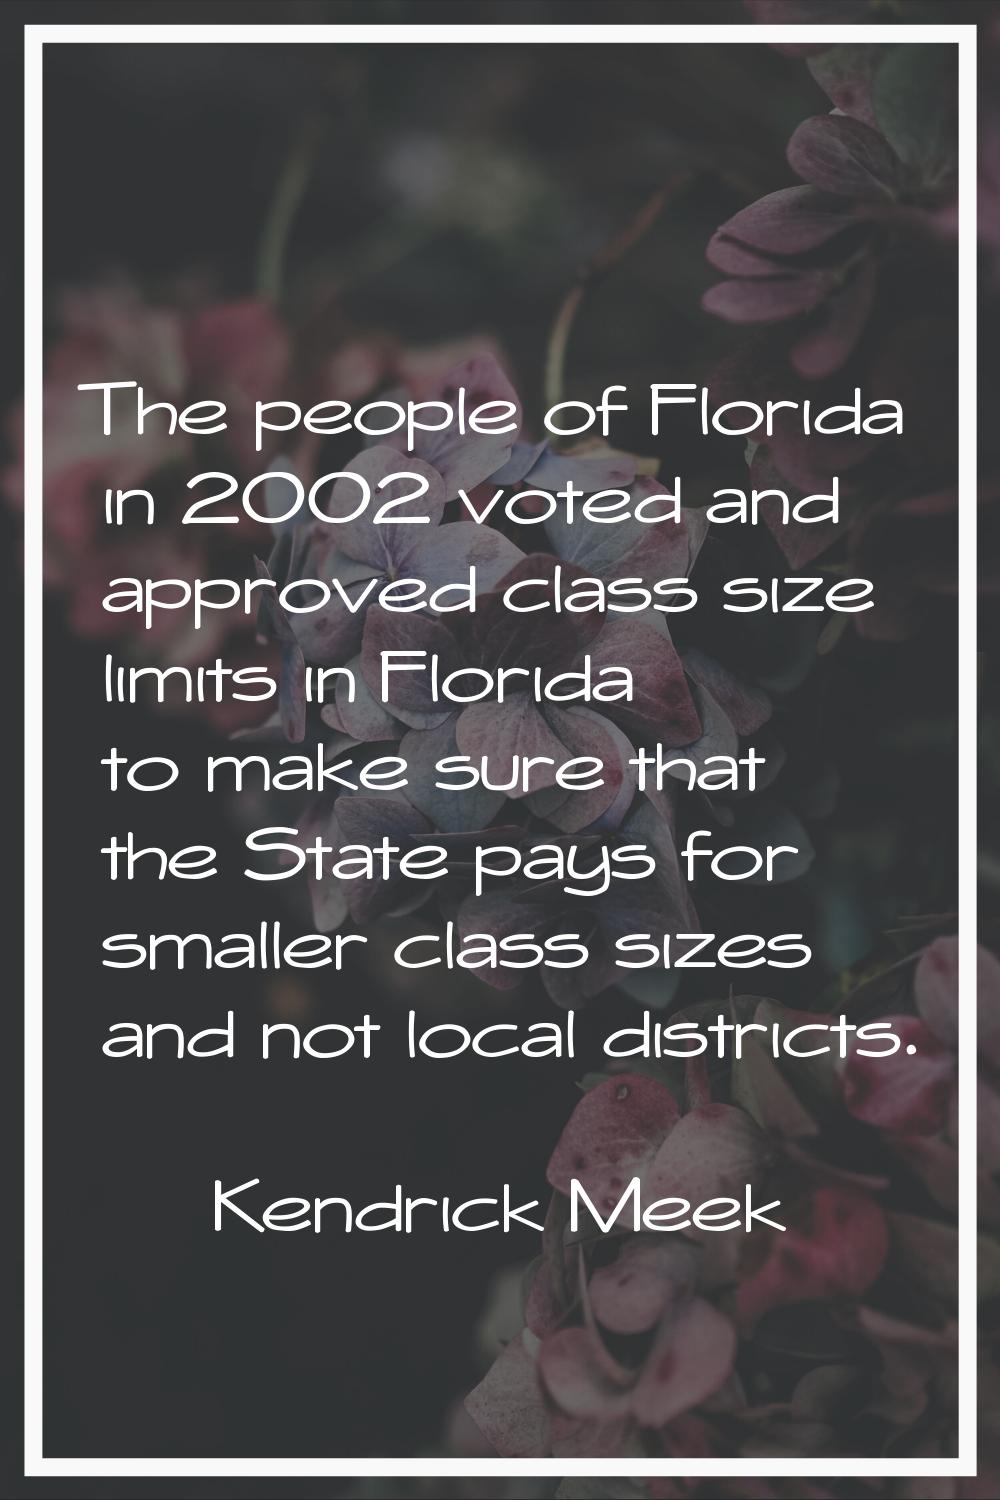 The people of Florida in 2002 voted and approved class size limits in Florida to make sure that the